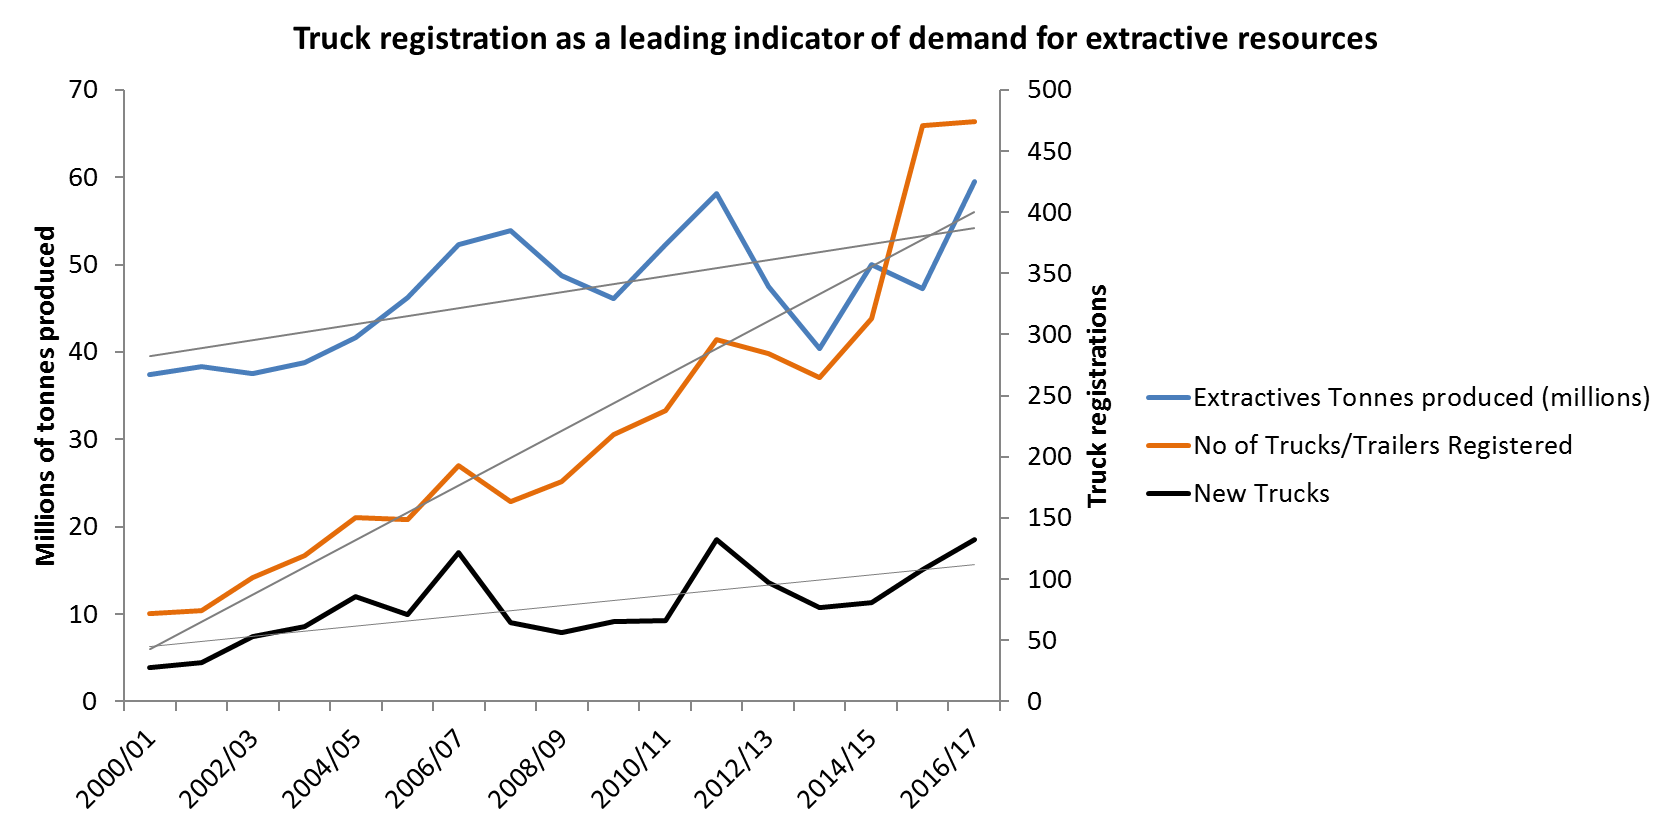 graph shows truck registration as a leading indicator of demand for extractive resources. it shows a historical correlatio between the number of trucks or trailers regisreed and the volume of extractives produced, which lags slightly behind truk registrations. in 2016/17 the number of truck and trailer registrations spiked to higher than ever before. 